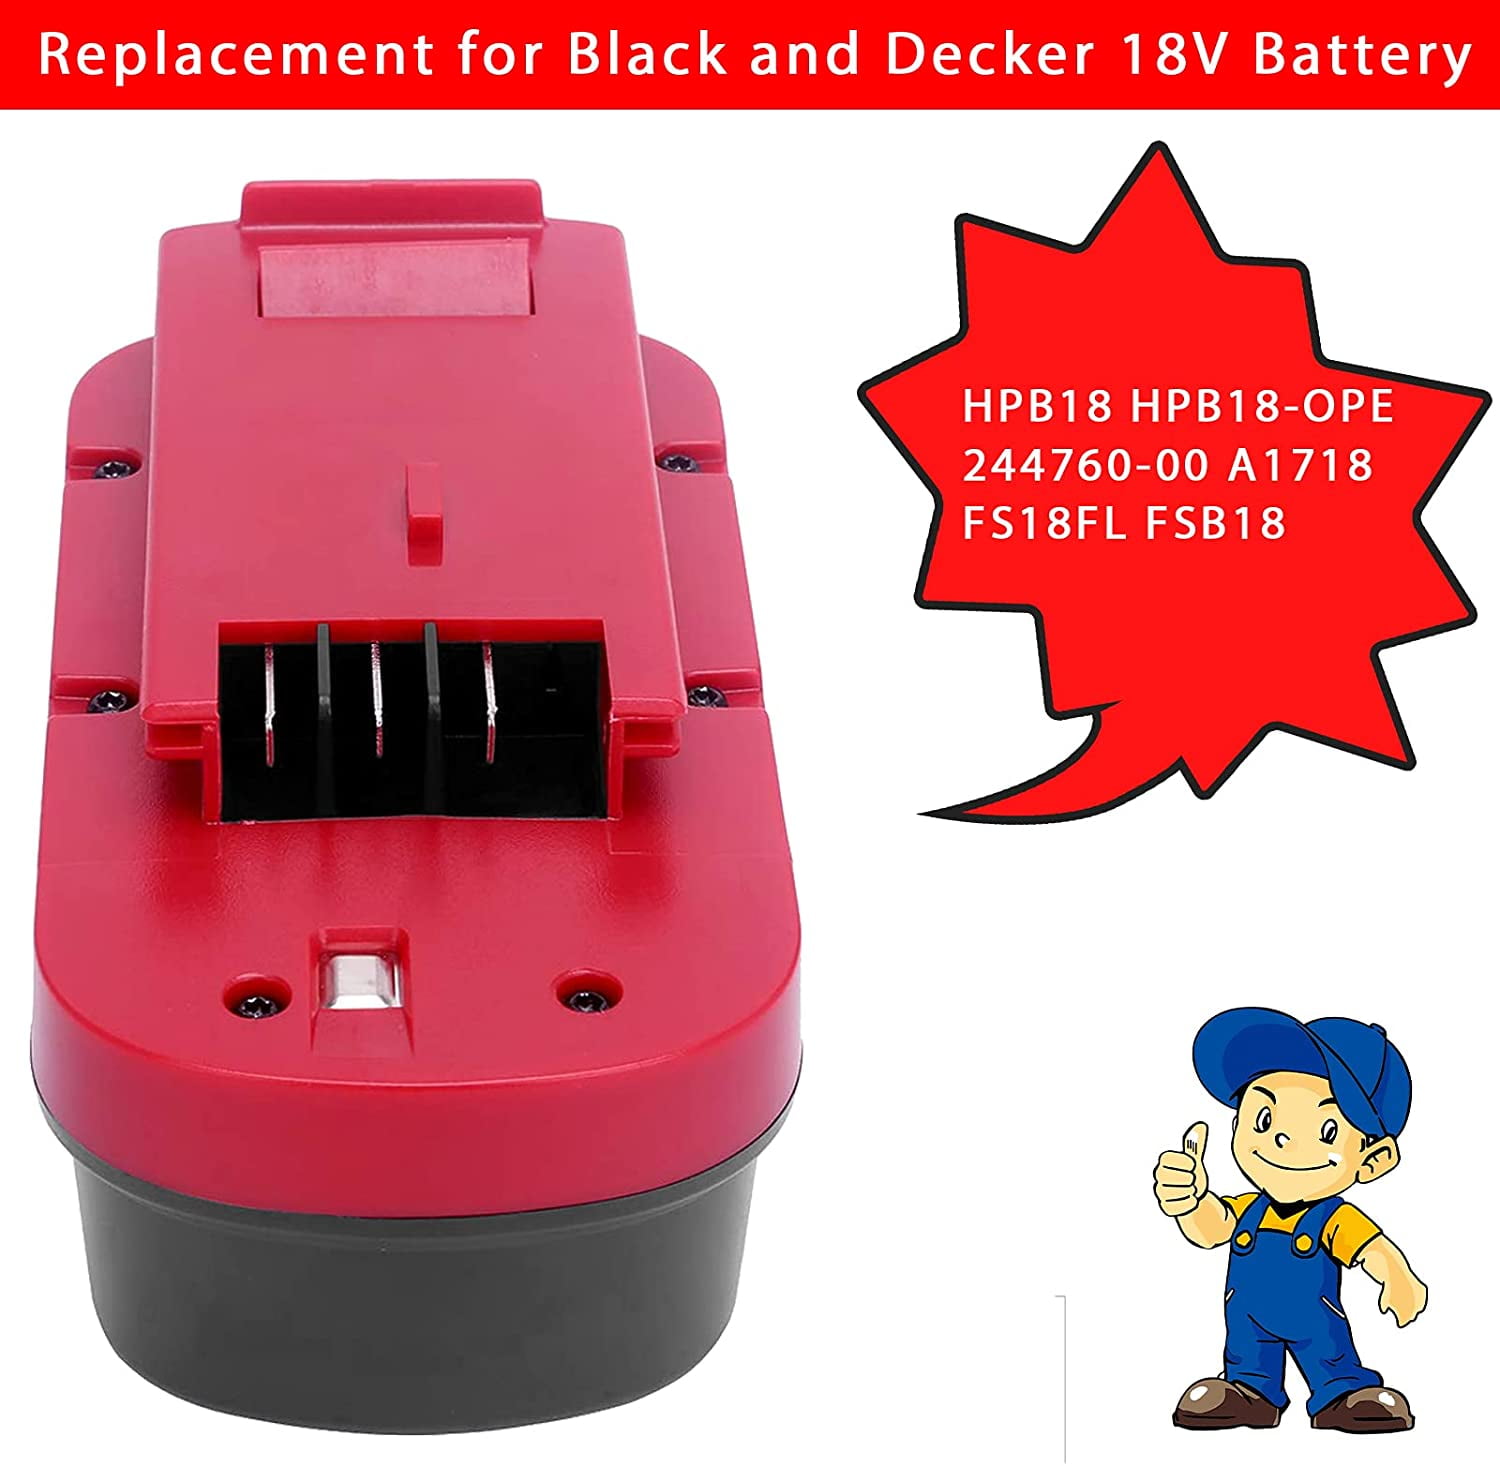 Upgraded to 6800mAh】HPB18 Battery Compatible with Black and Decker 18V  Battery Ni-Mh HPB18-OPE FSB18 A1718 Tools Battery